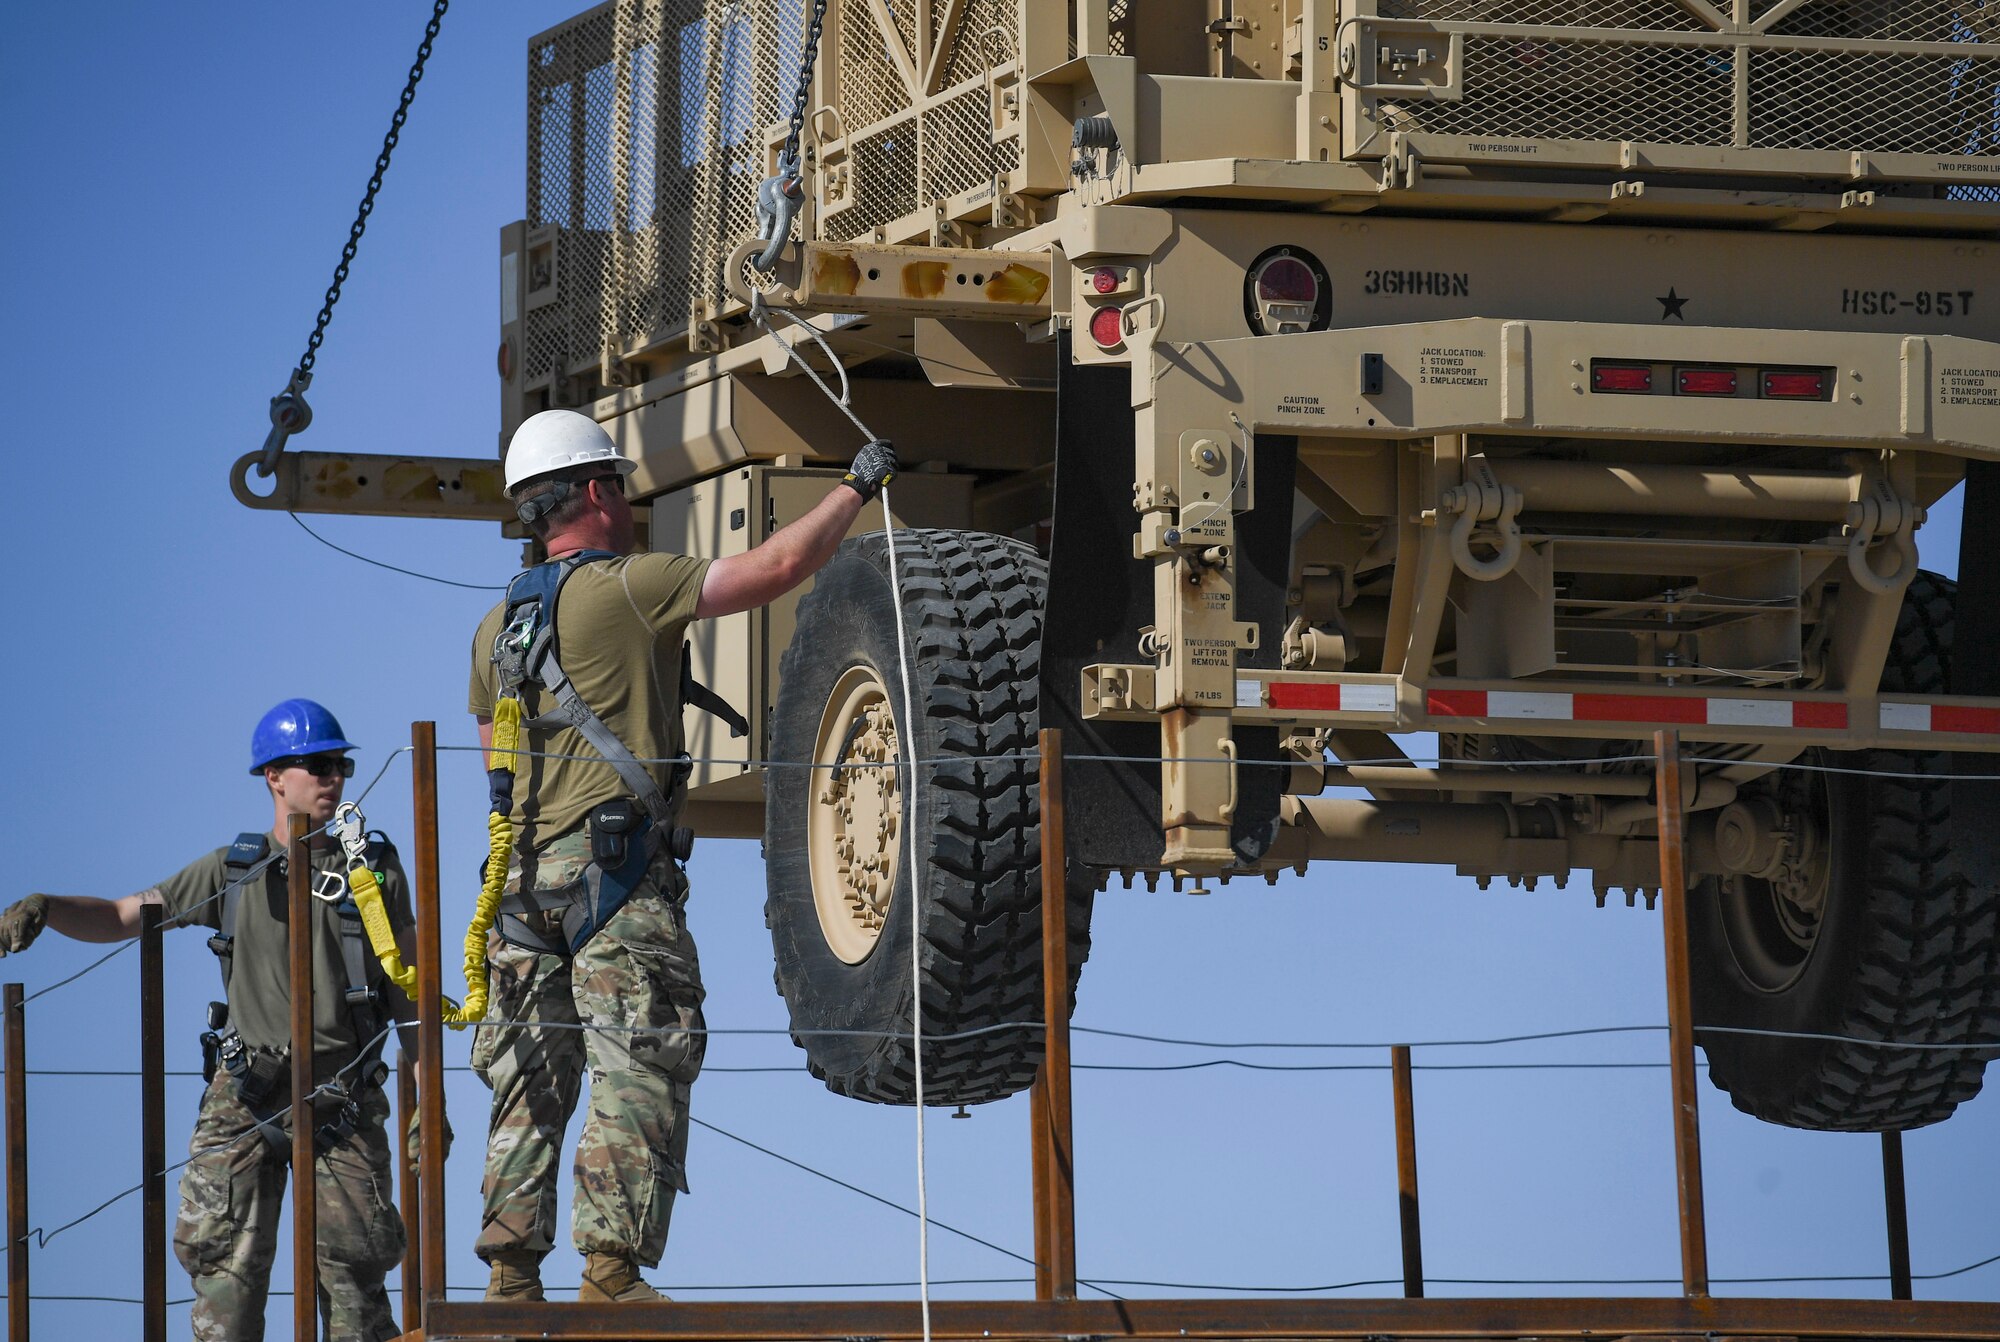 U.S. Air Force Airmen assigned to the 386th Expeditionary Civil Engineer Squadron structures unit guide the placement of an AN/MQP-64 Sentinel radar at Ali Al Salem Air Base, Kuwait, Nov. 23, 2020.